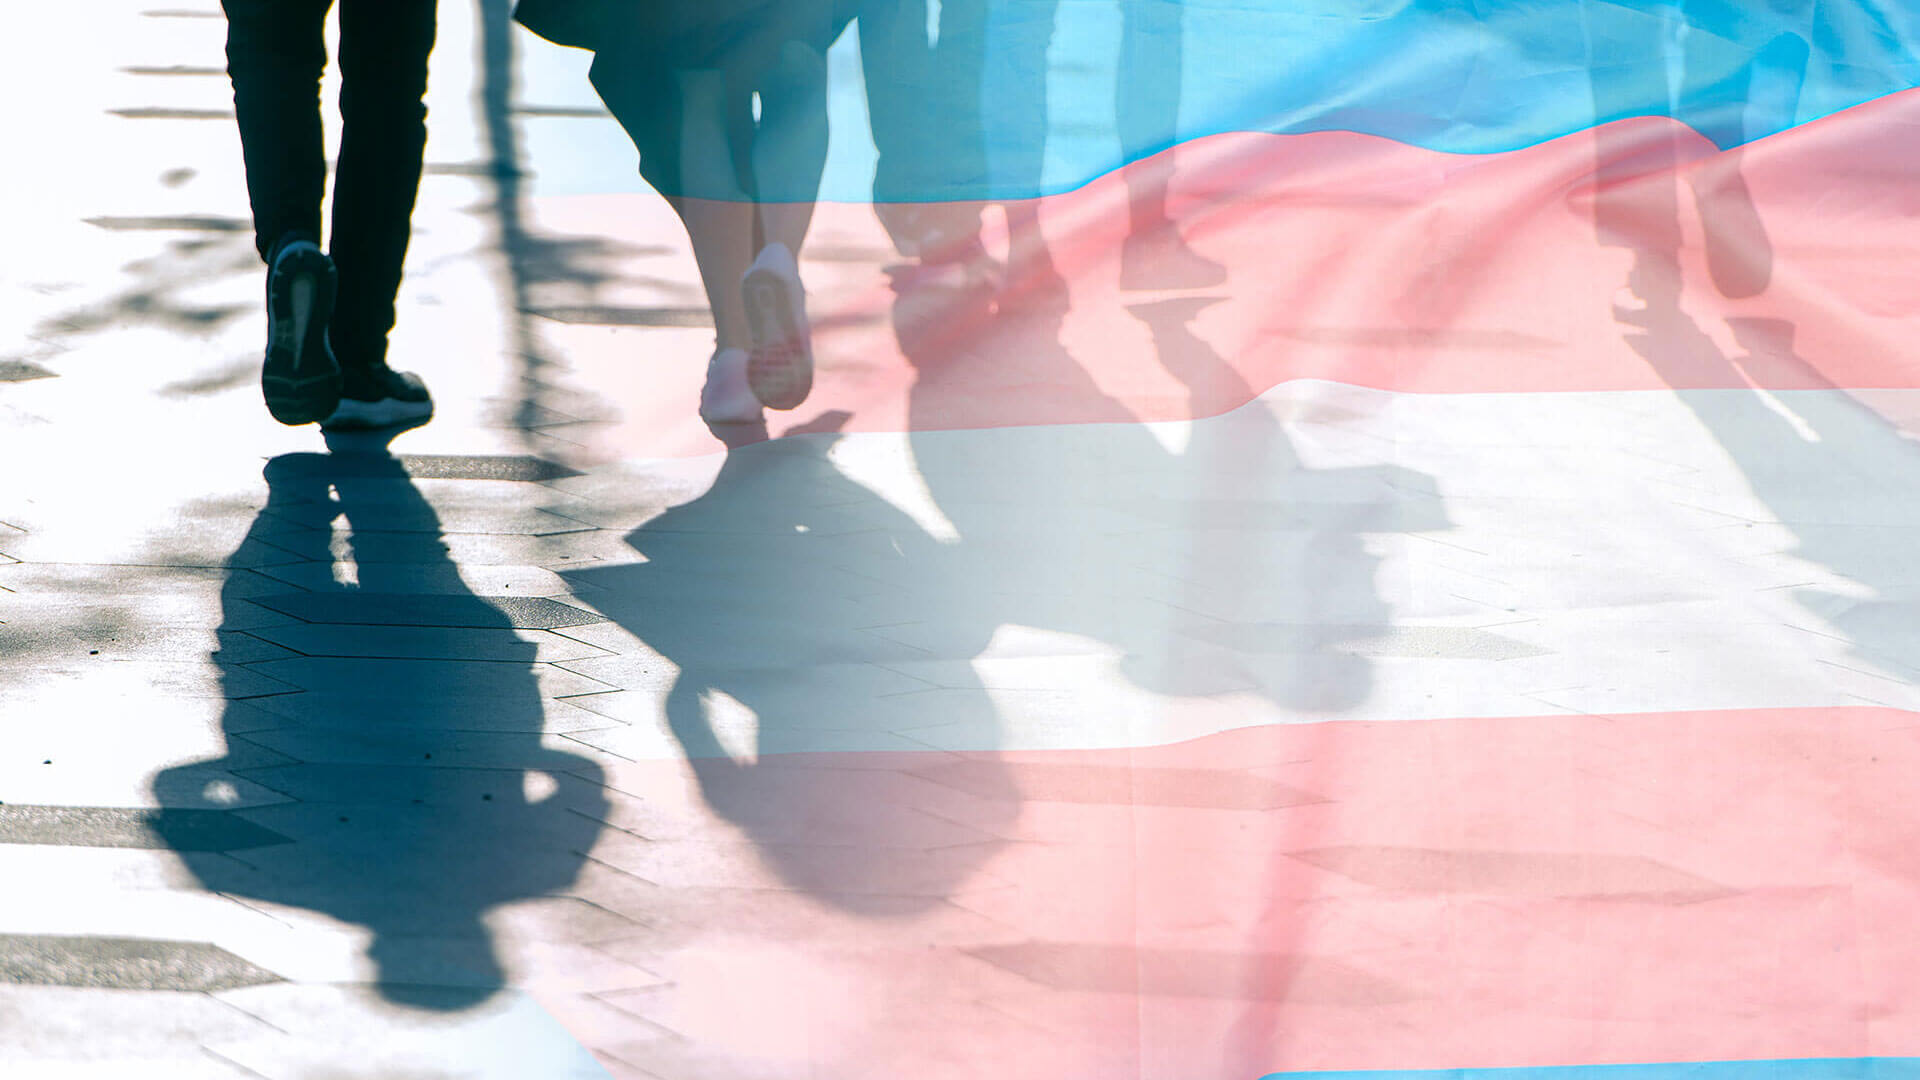 Transgender flag, shadows and silhouettes of people on a road